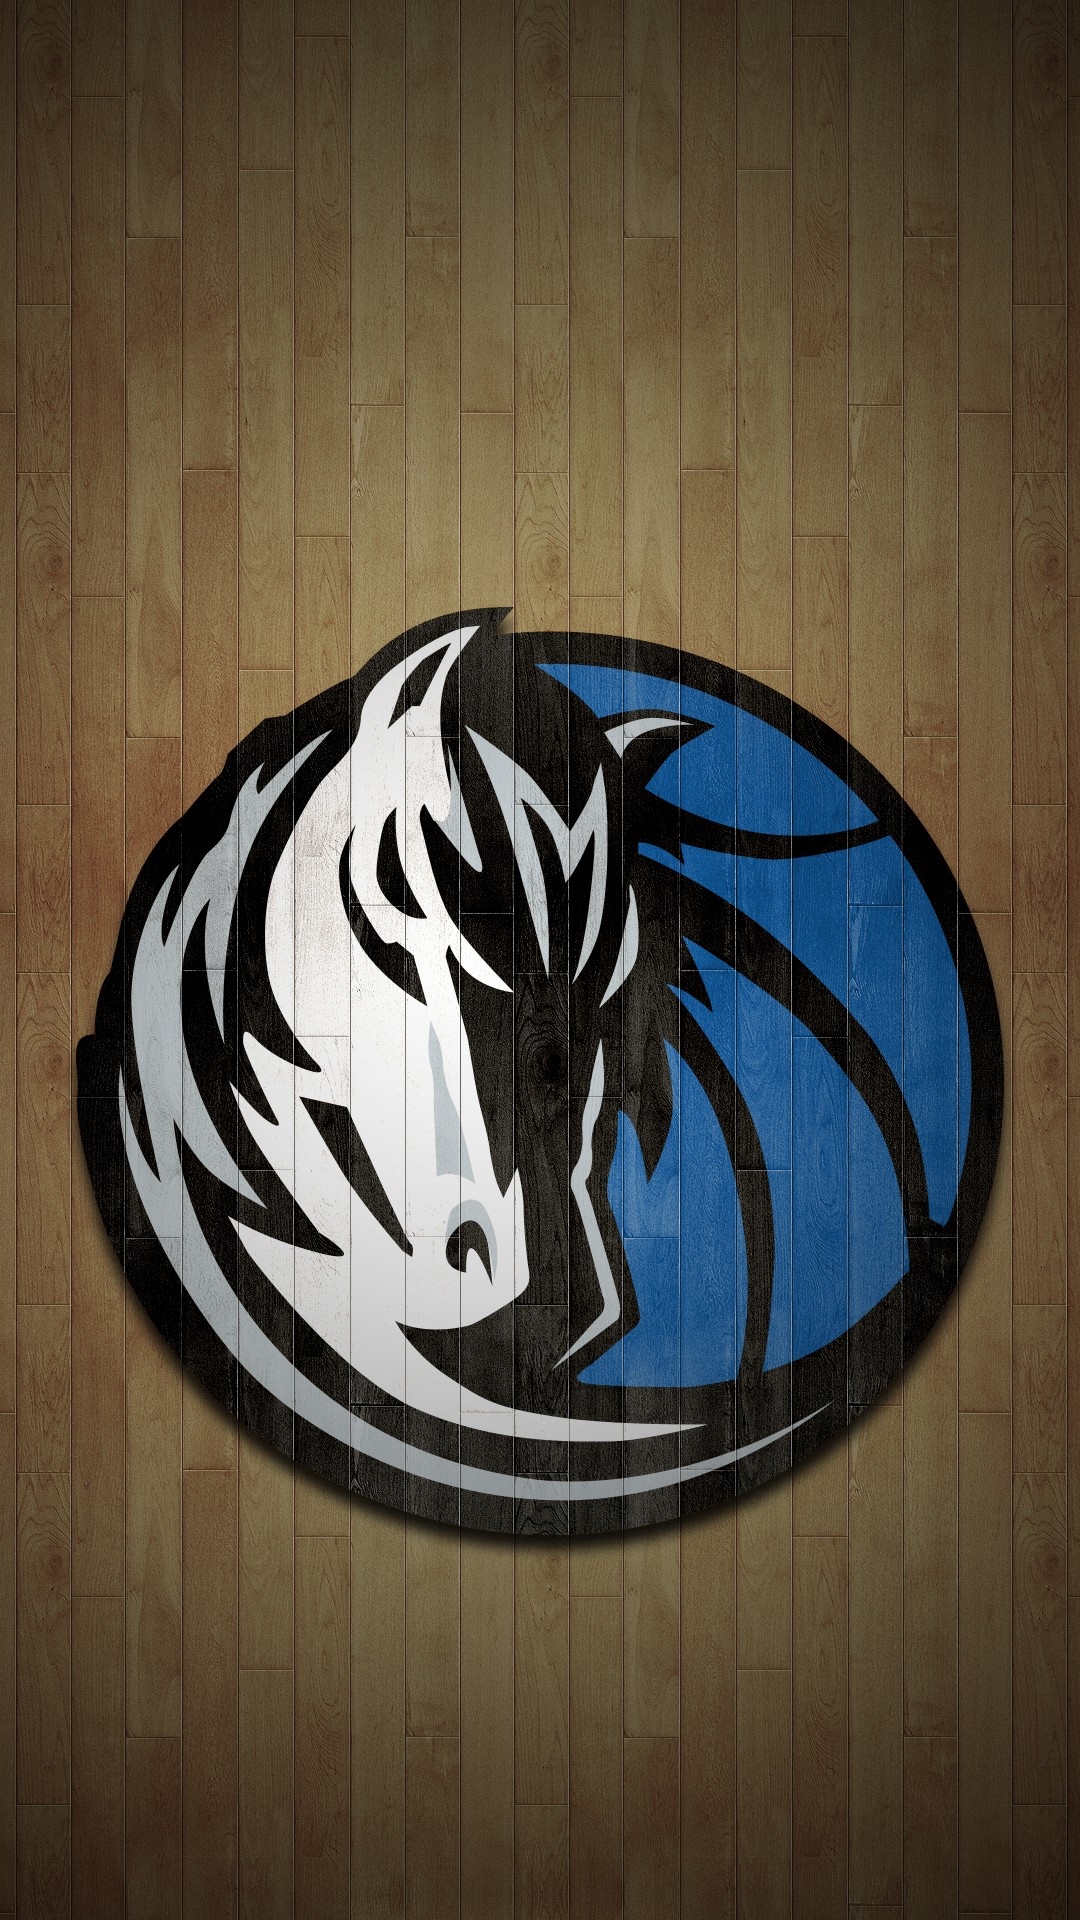 Dallas Mavericks HD Wallpaper For iPhone with high-resolution 1080x1920 pixel. You can use this wallpaper for your Desktop Computer Backgrounds, Windows or Mac Screensavers, iPhone Lock screen, Tablet or Android and another Mobile Phone device